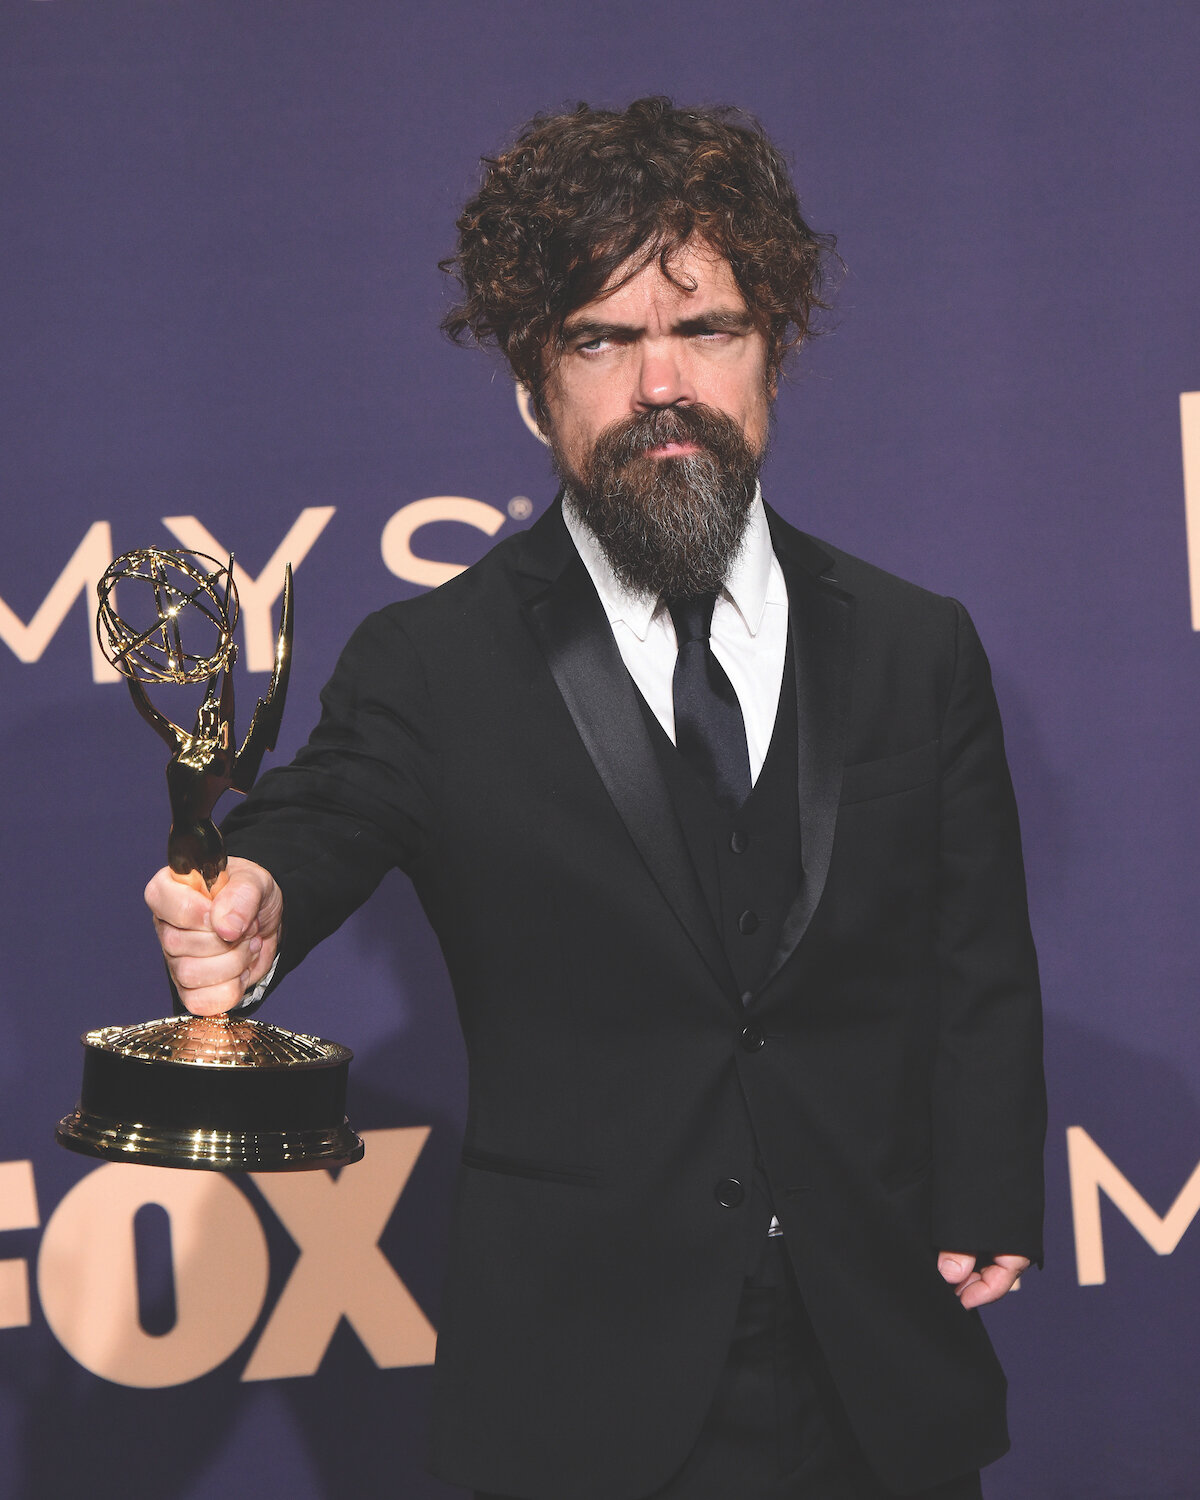 man with brown hair and beard holds emmy on the red carpet, purple background